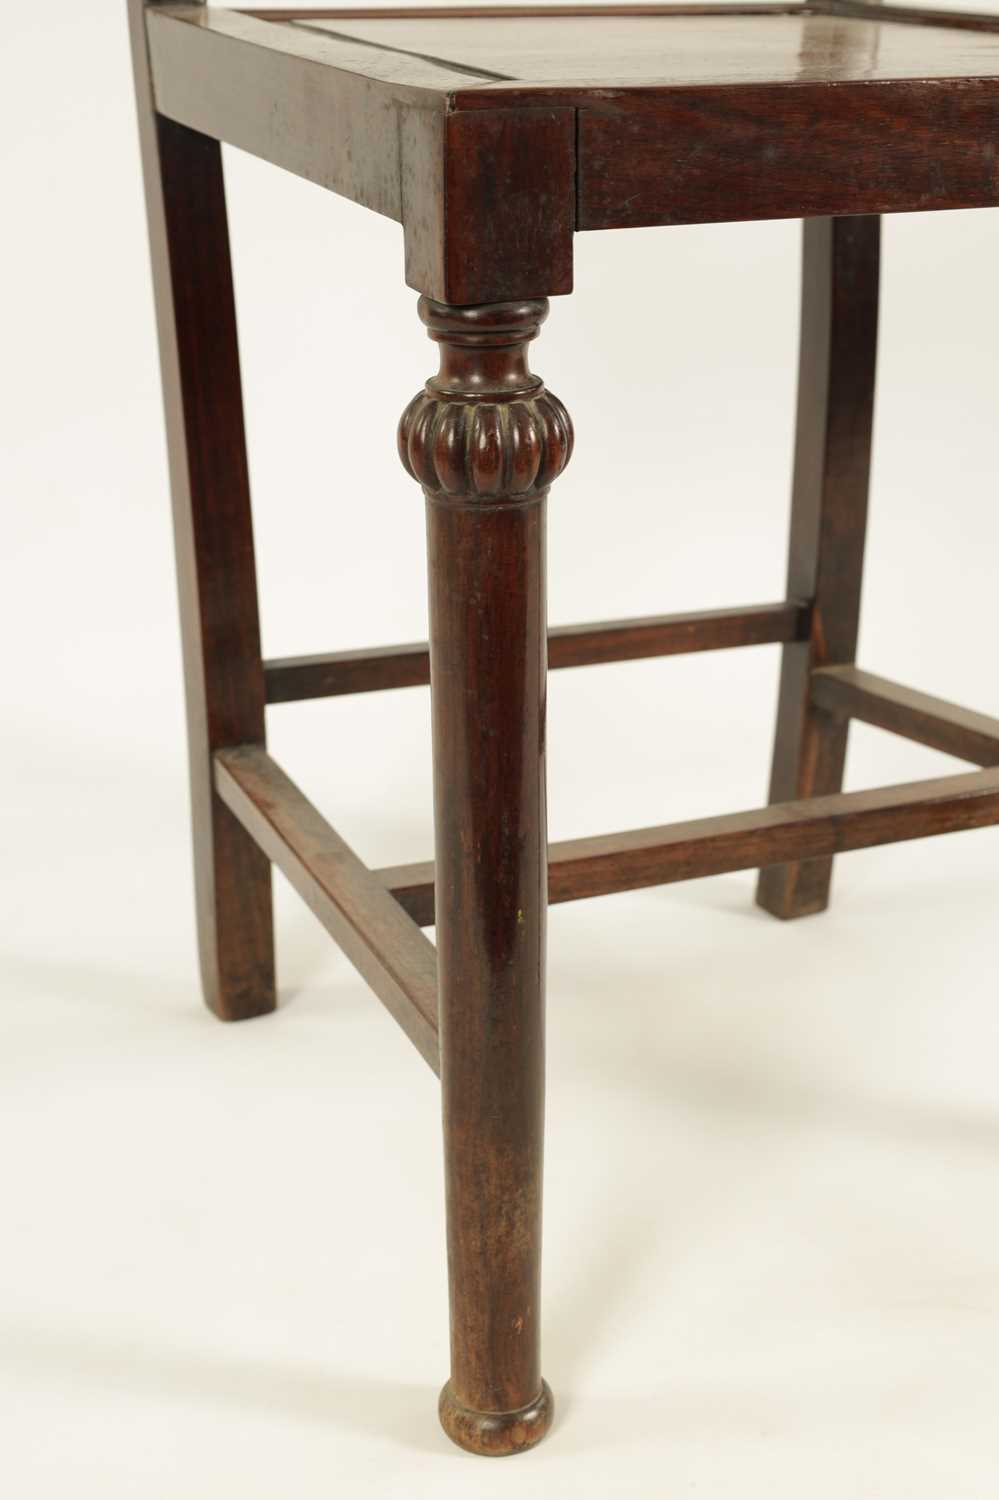 A GOOD PAIR OF 19TH CENTURY CHINESE HARDWOOD SIDE CHAIRS - Image 5 of 11